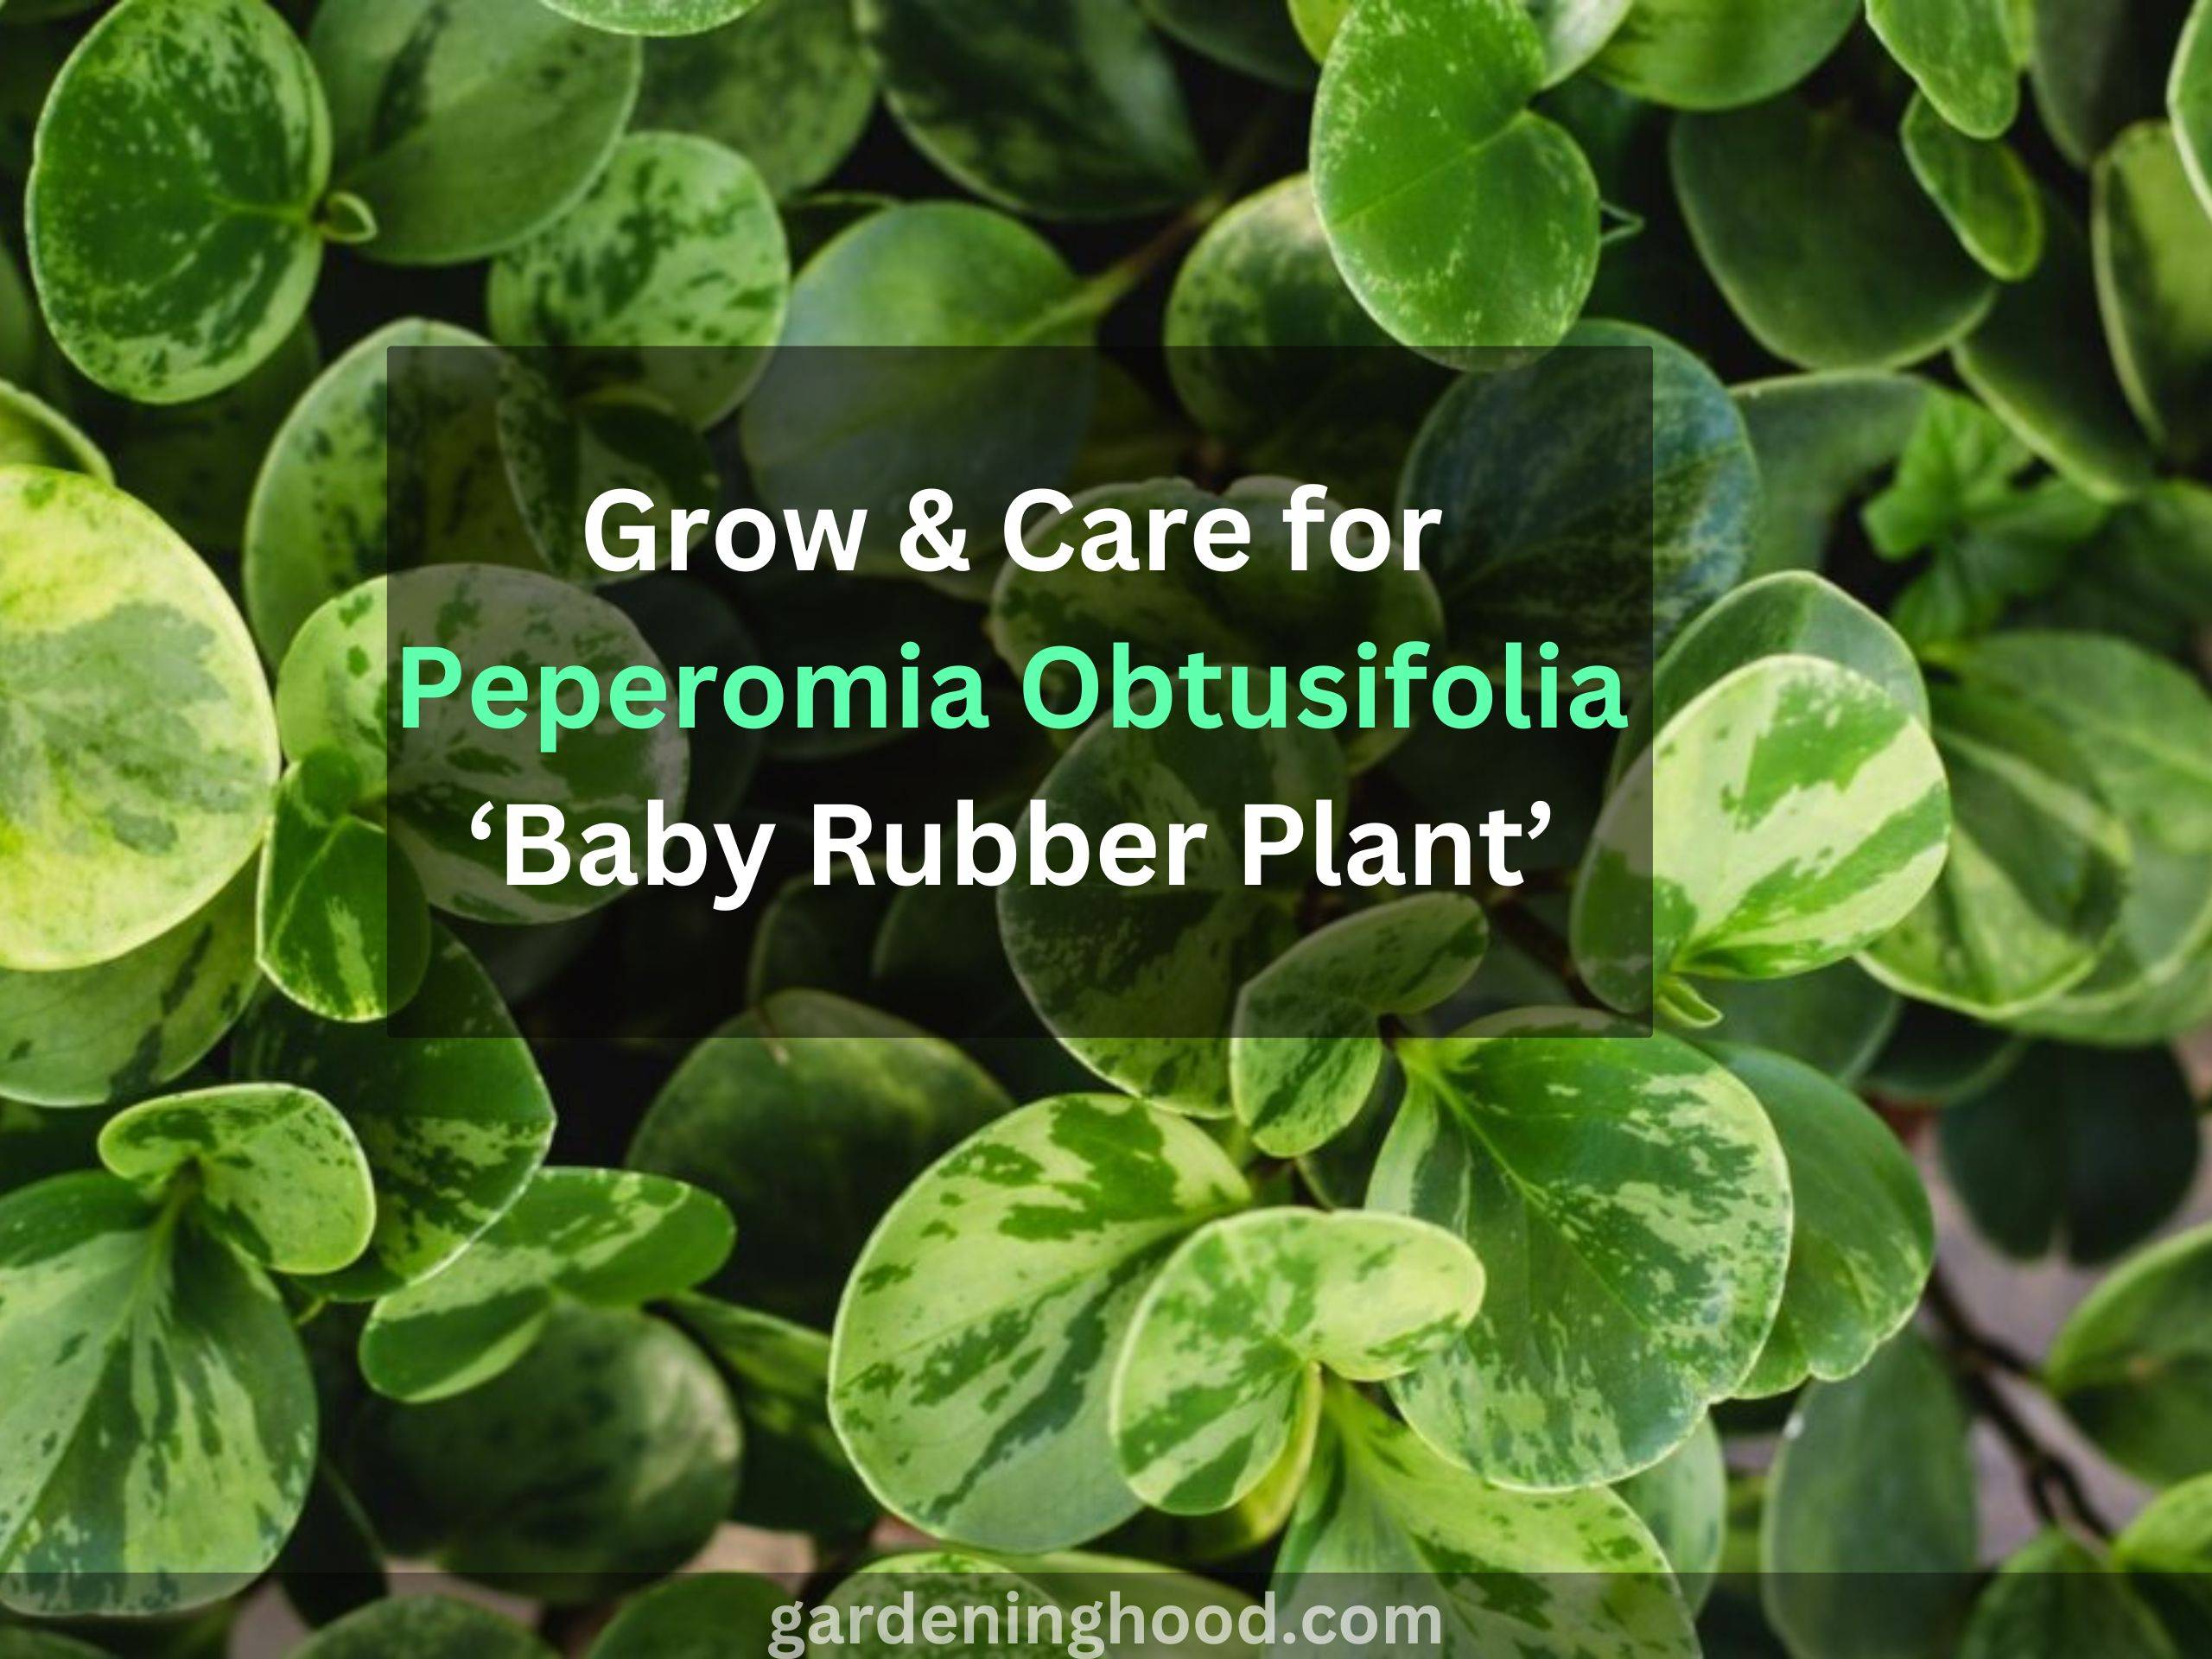 Grow & Care for Peperomia Obtusifolia ‘Baby Rubber Plant’